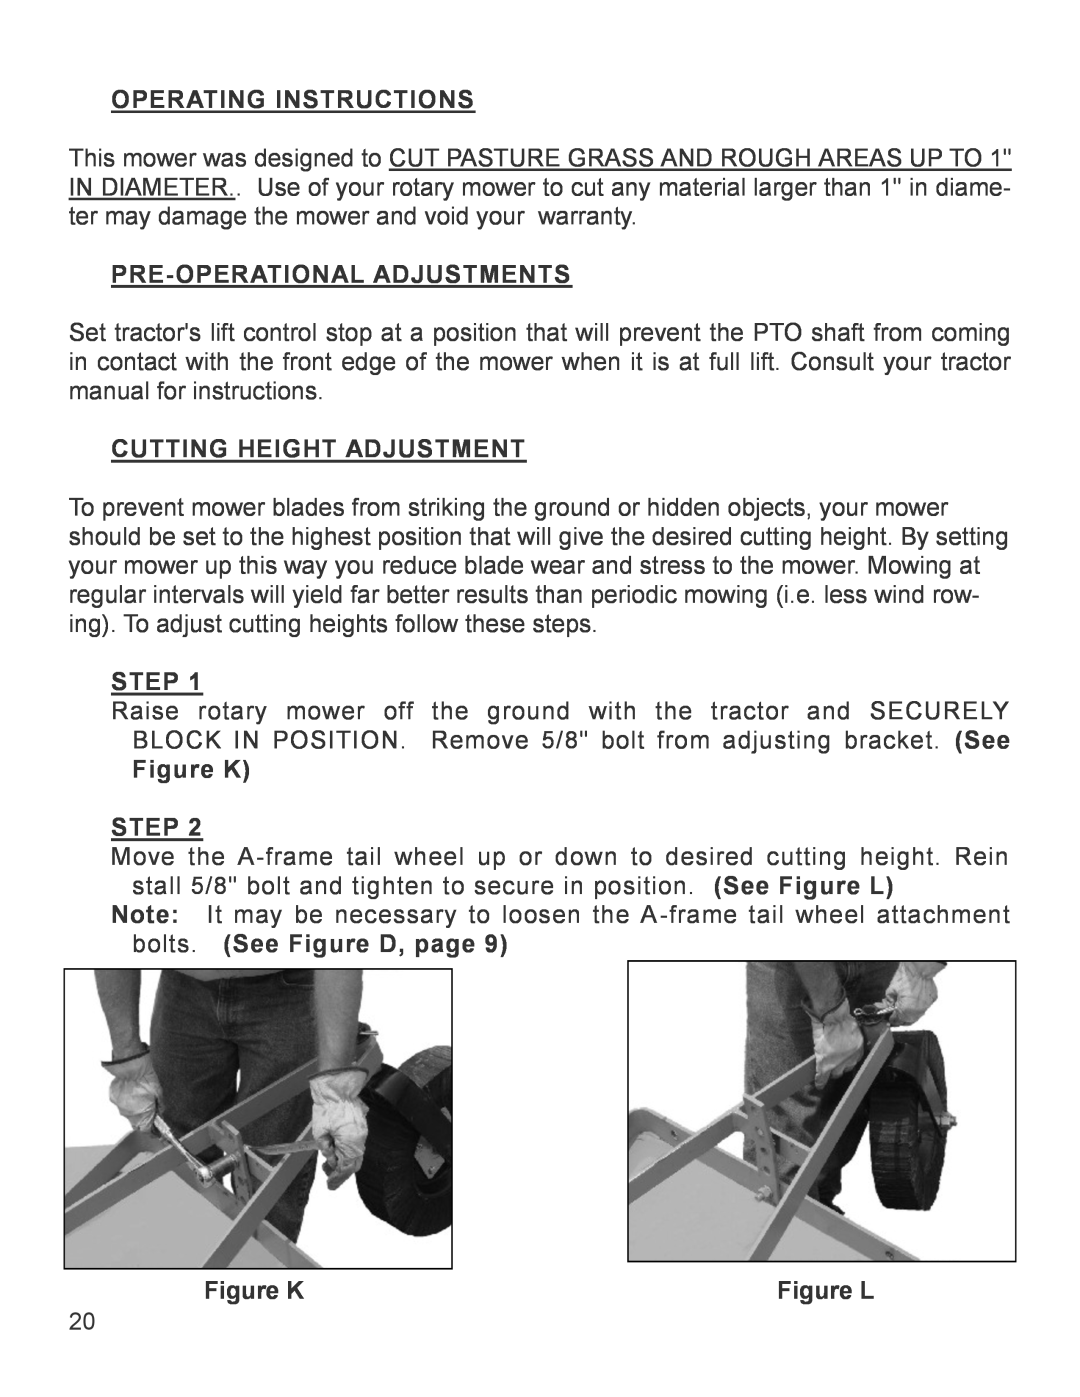 King Kutter 999998 Operating Instructions, Pre-Operationaladjustments, Cutting Height Adjustment, Step, Figure K STEP 